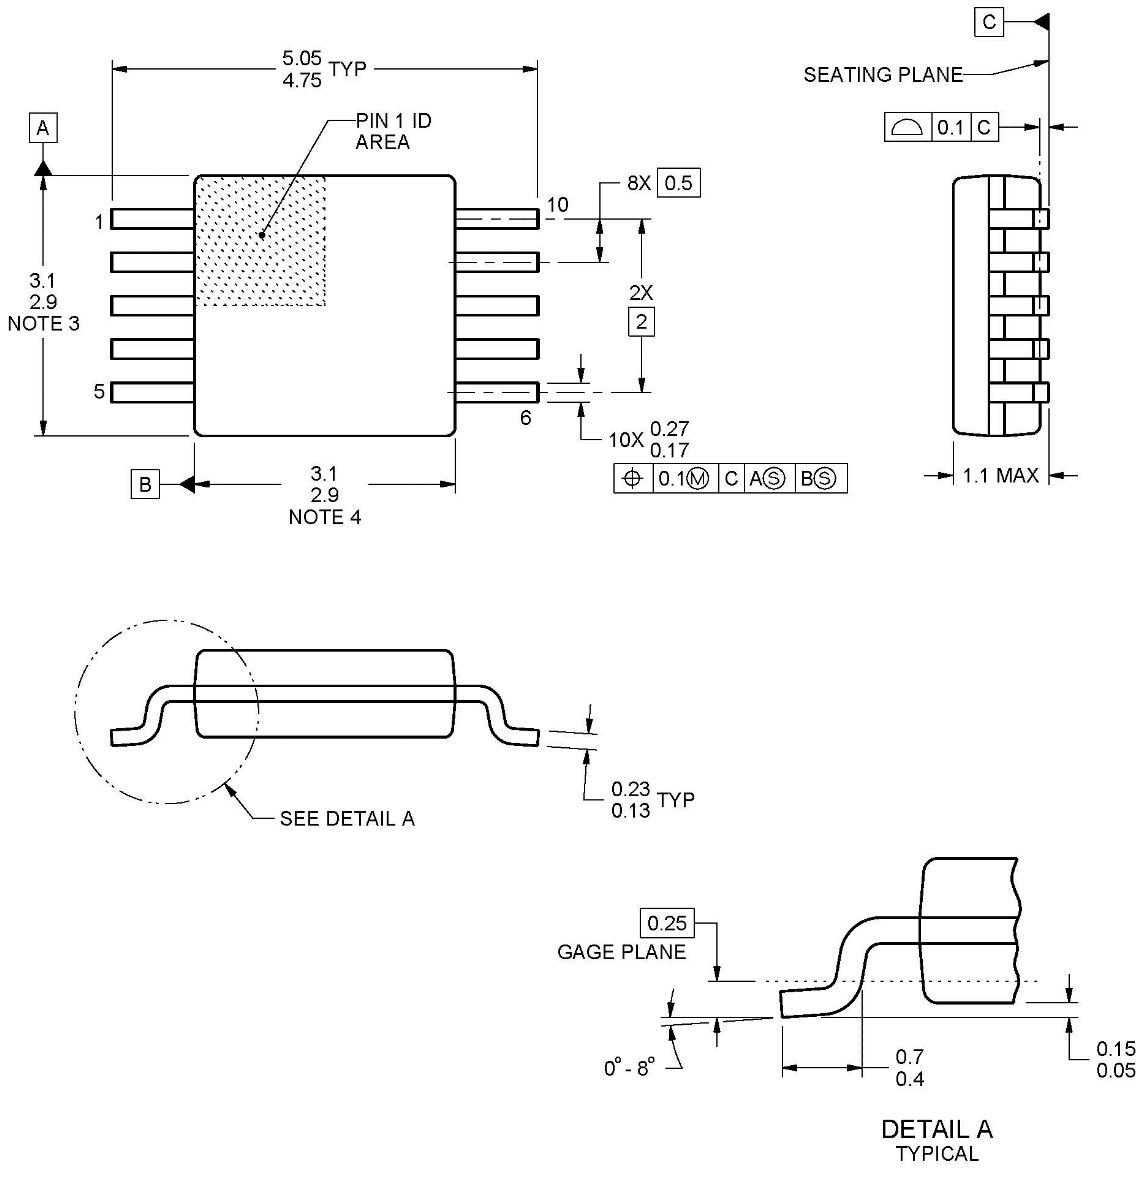 INA226 2D Model and Dimensions